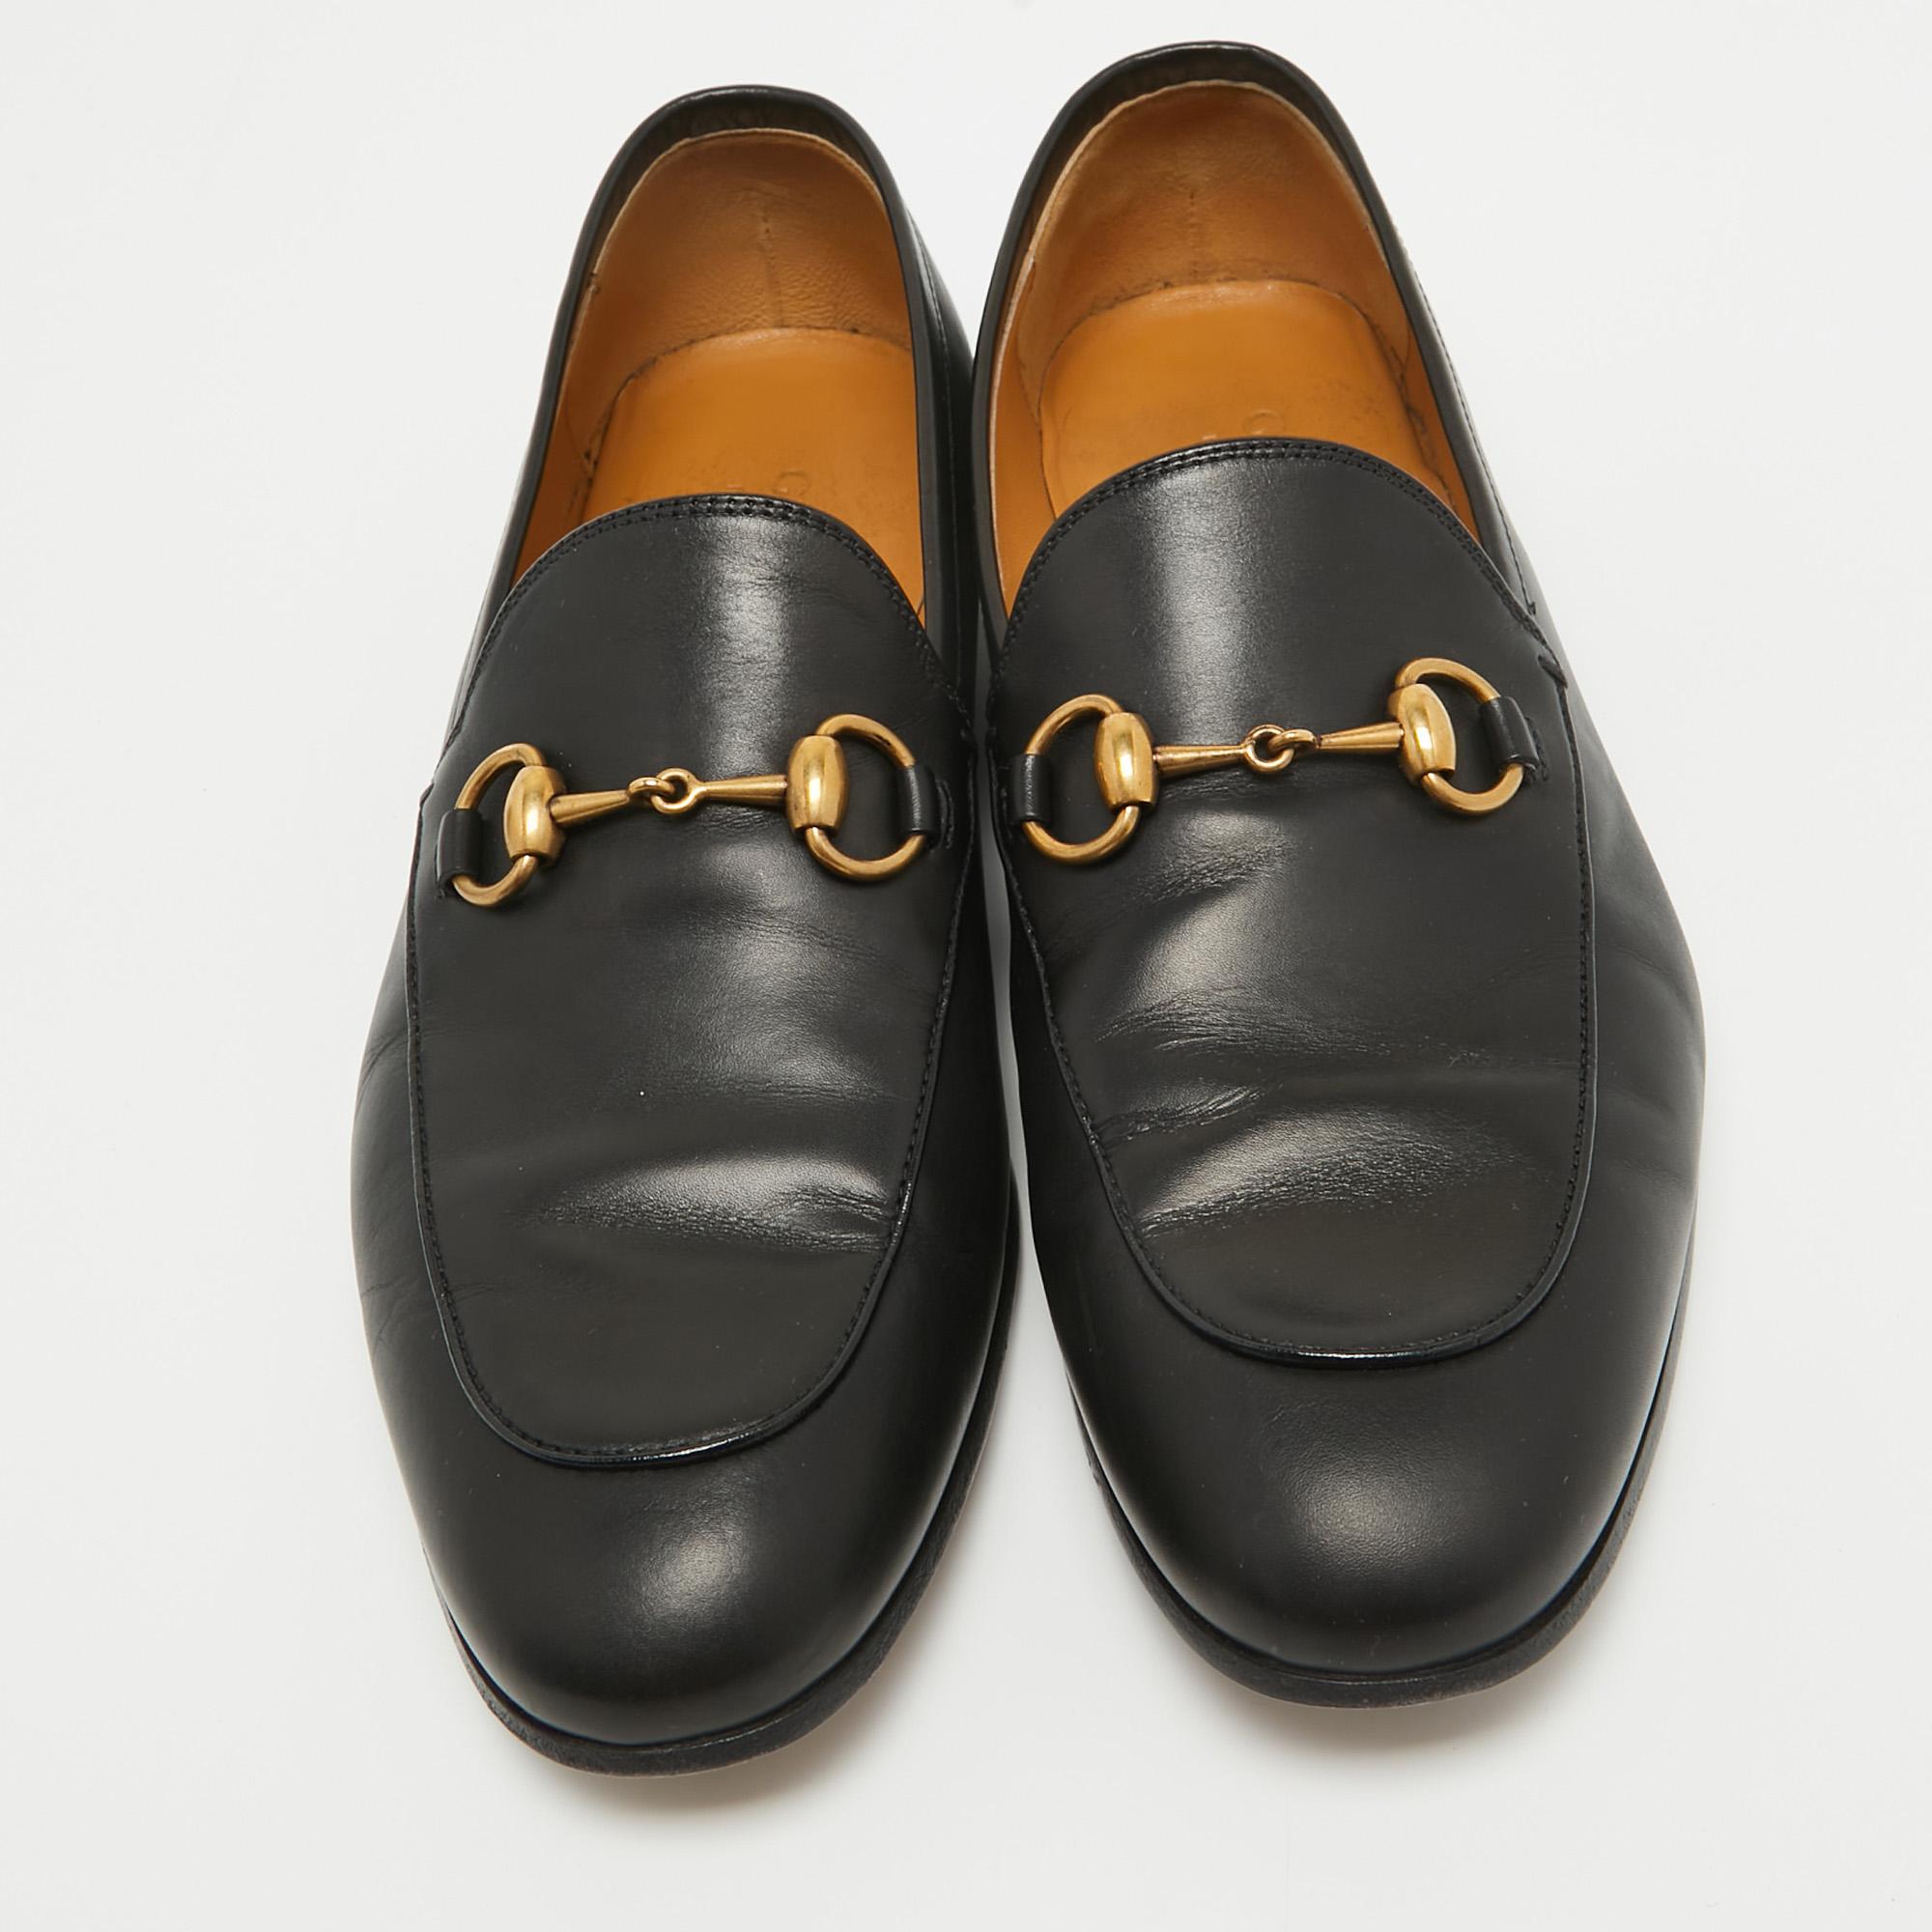 Let this comfortable pair be your first choice when you're out for a long day. These Gucci shoes have well-sewn uppers beautifully set on durable soles.

Includes: Original Dustbag, Original Box, Info Booklet